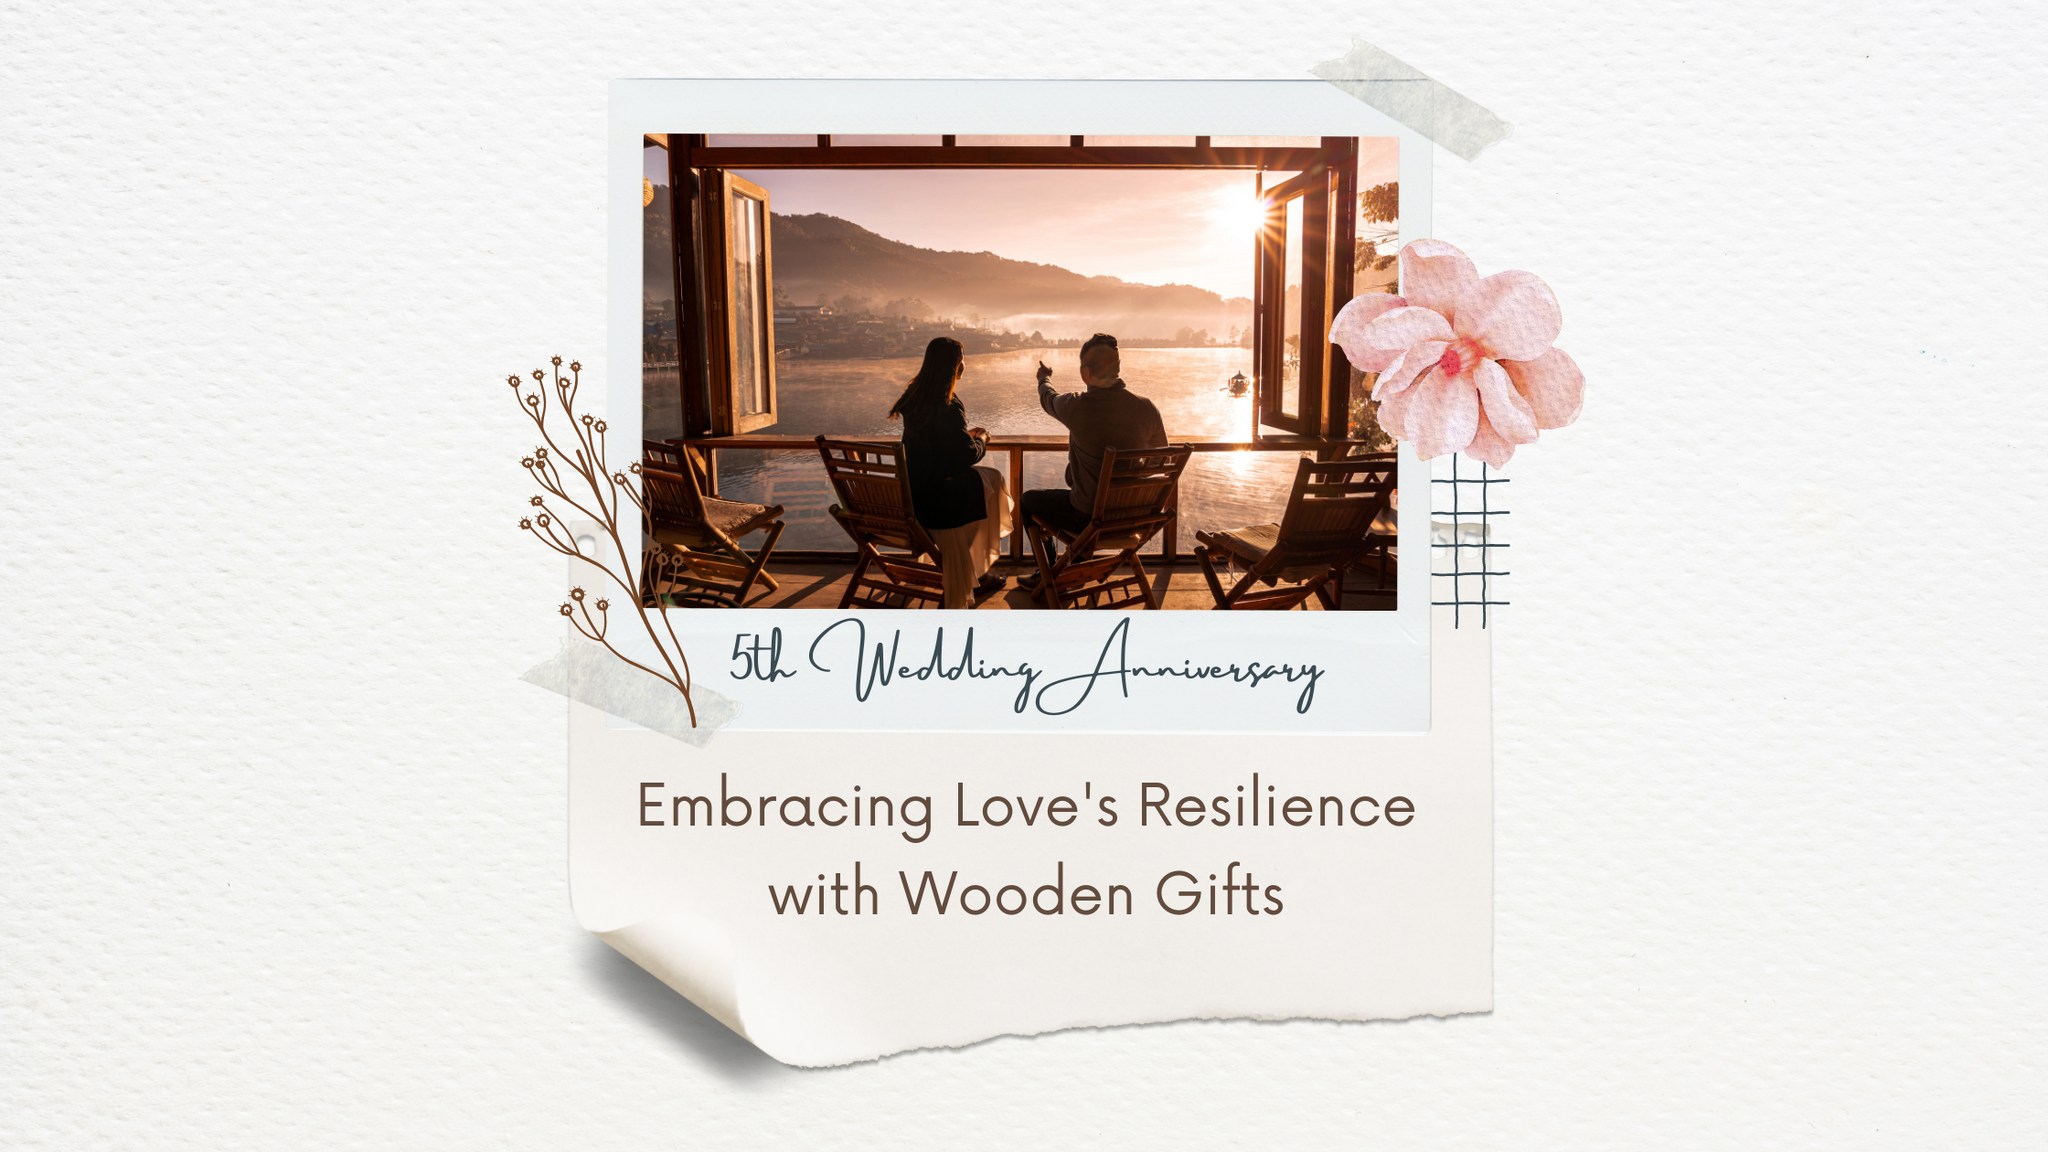 5th Wedding Anniversary: Embracing Love's Resilience with Wooden Gifts